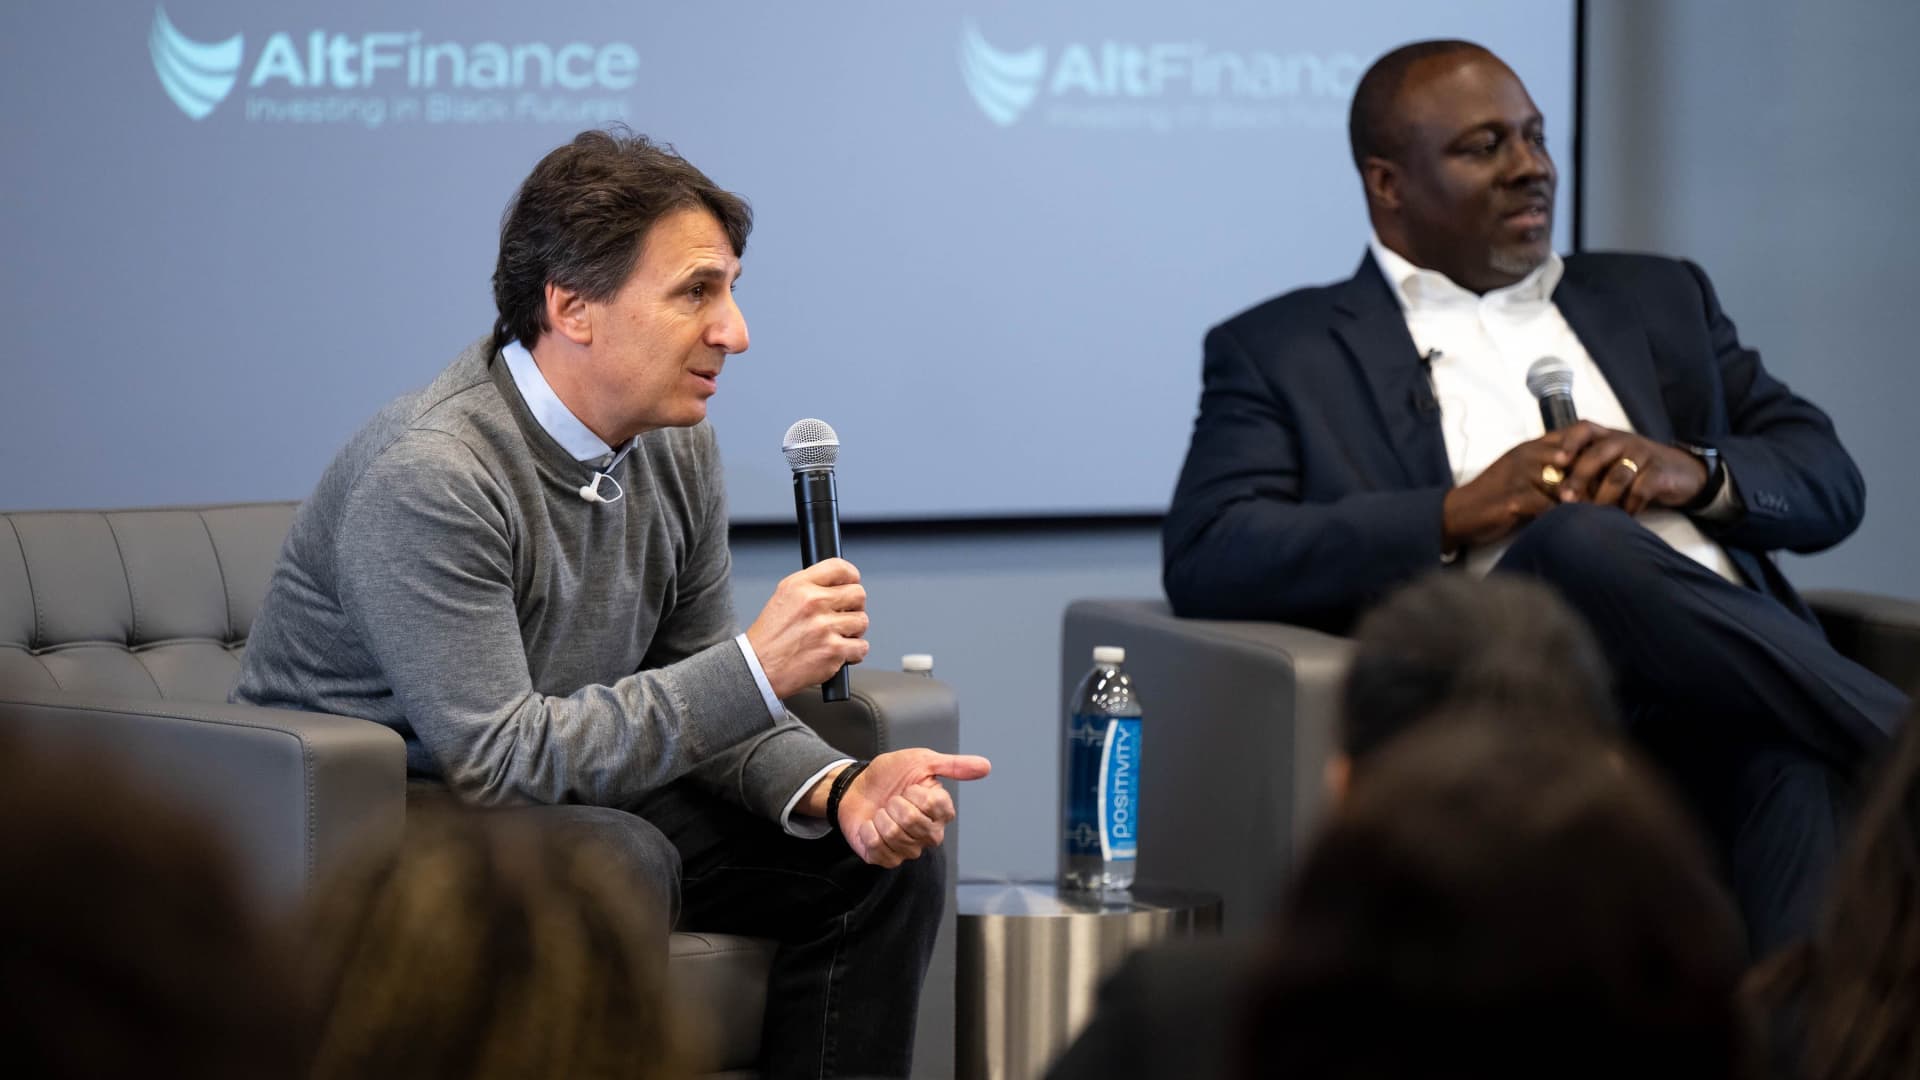 Marc Rowan, CEO of Apollo Global Management, and Marcus Shaw, CEO of AltFinance